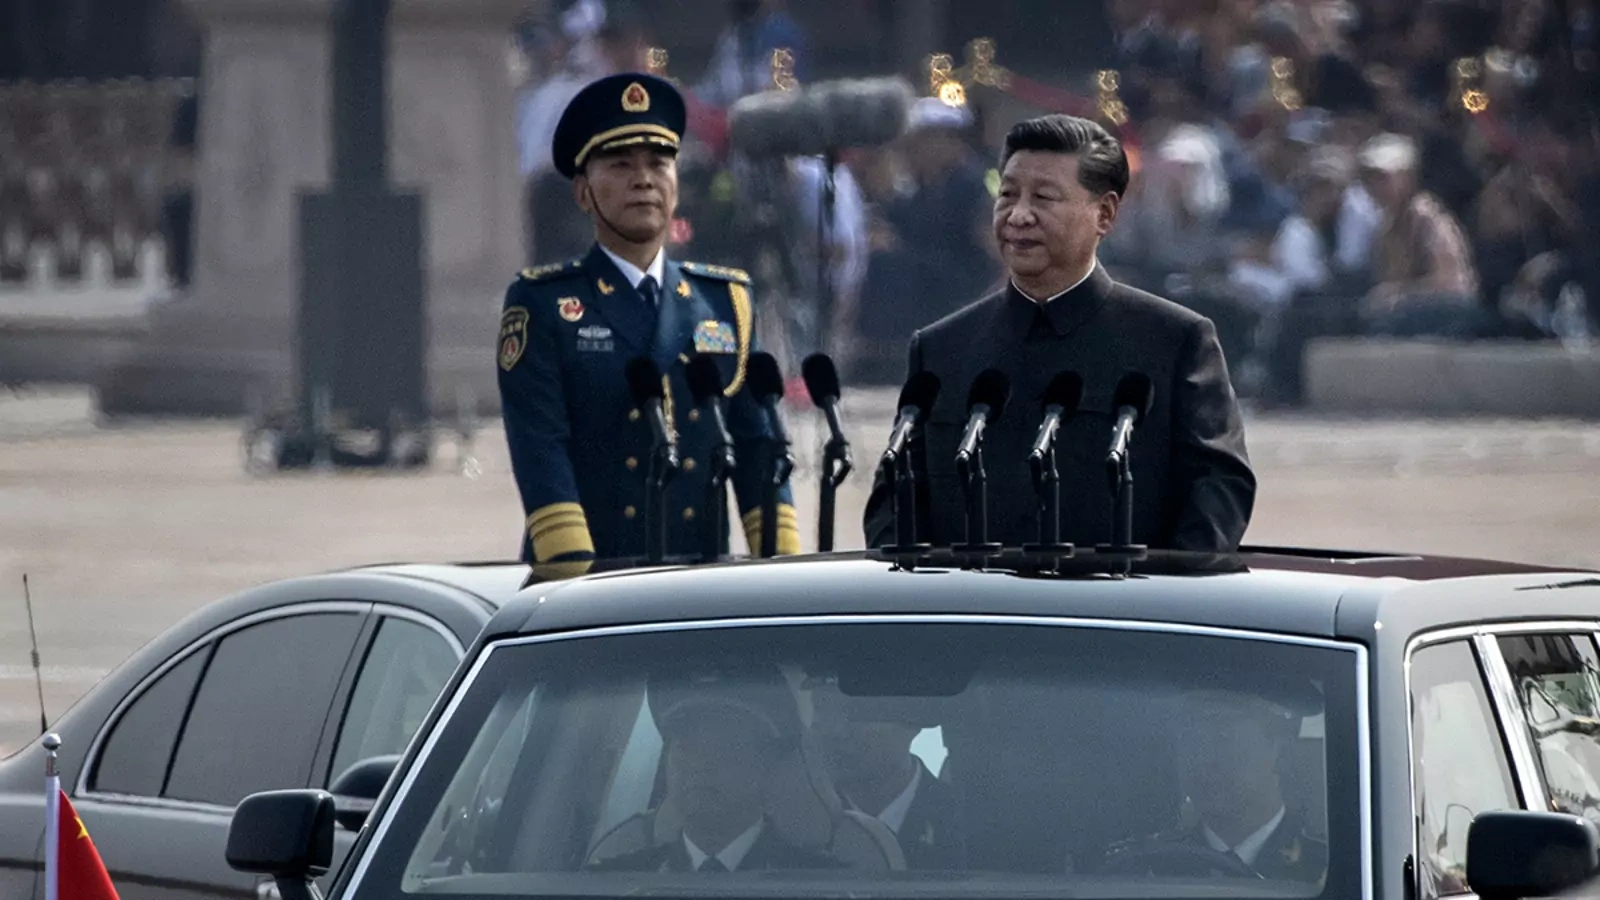 Chinese President Xi Jinping after inspecting the troops on October 1, 2019 in Beijing, China.